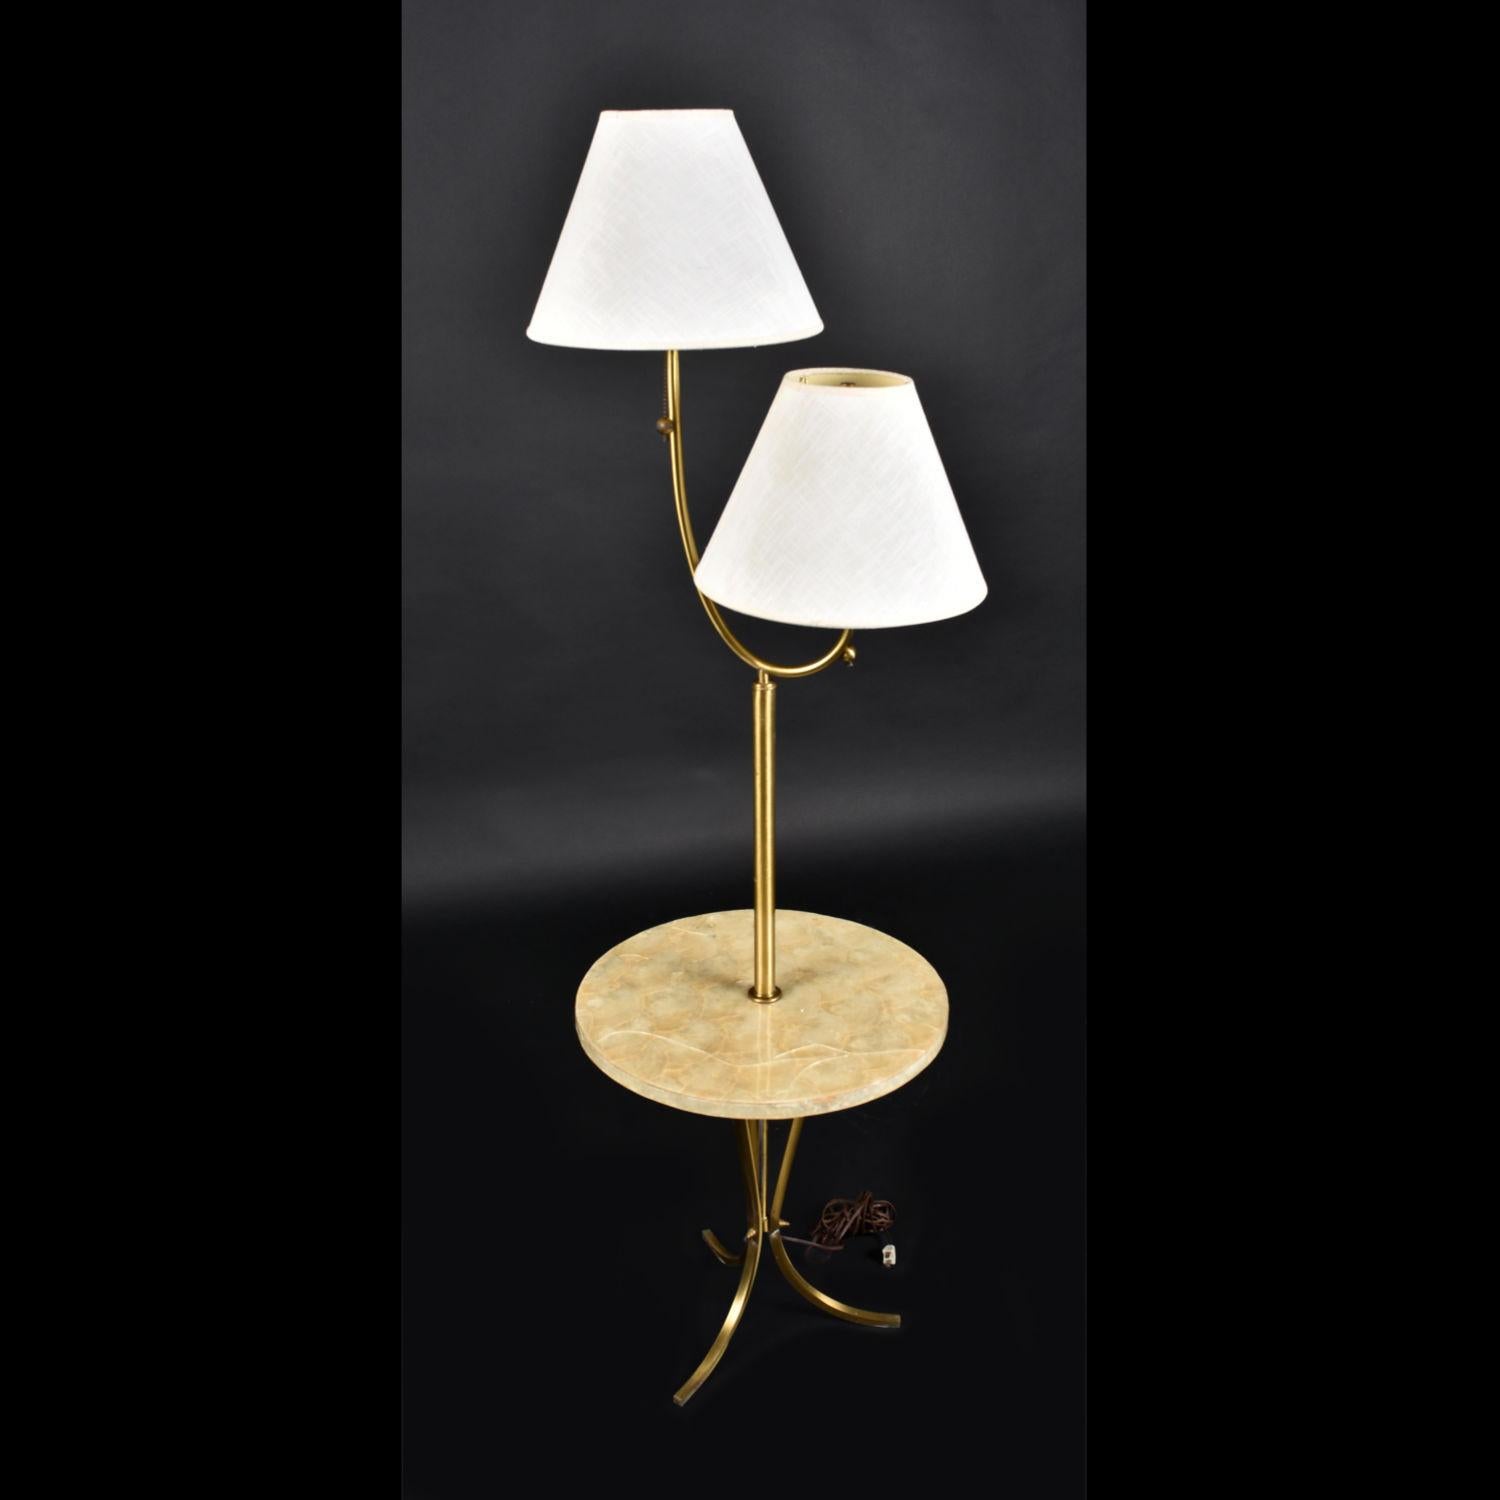 Everything about this Mid-Century Modern two-head floor lamp screams luxury. Each bit of the lamp was thoughtfully designed, right down to the nuts and bolts. The vintage floor lamp features two heads with 12